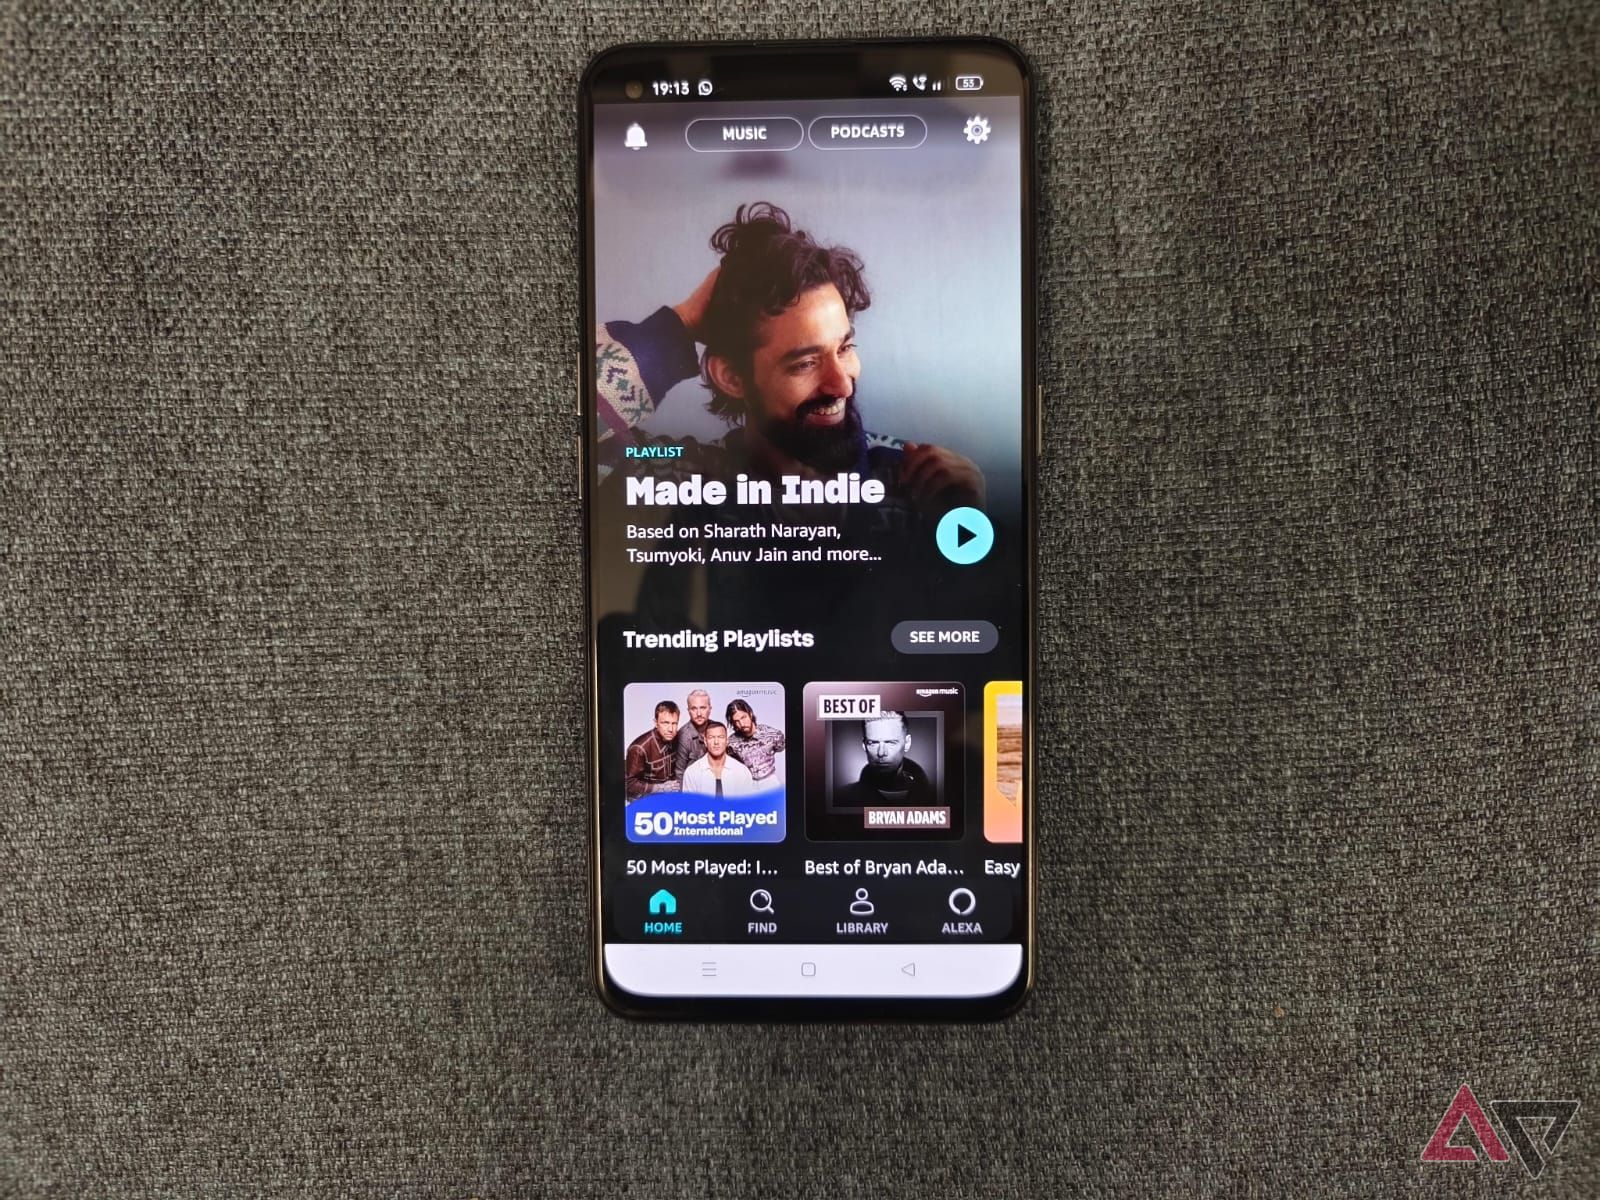 Photo of a phone showing the home screen of Amazon Music